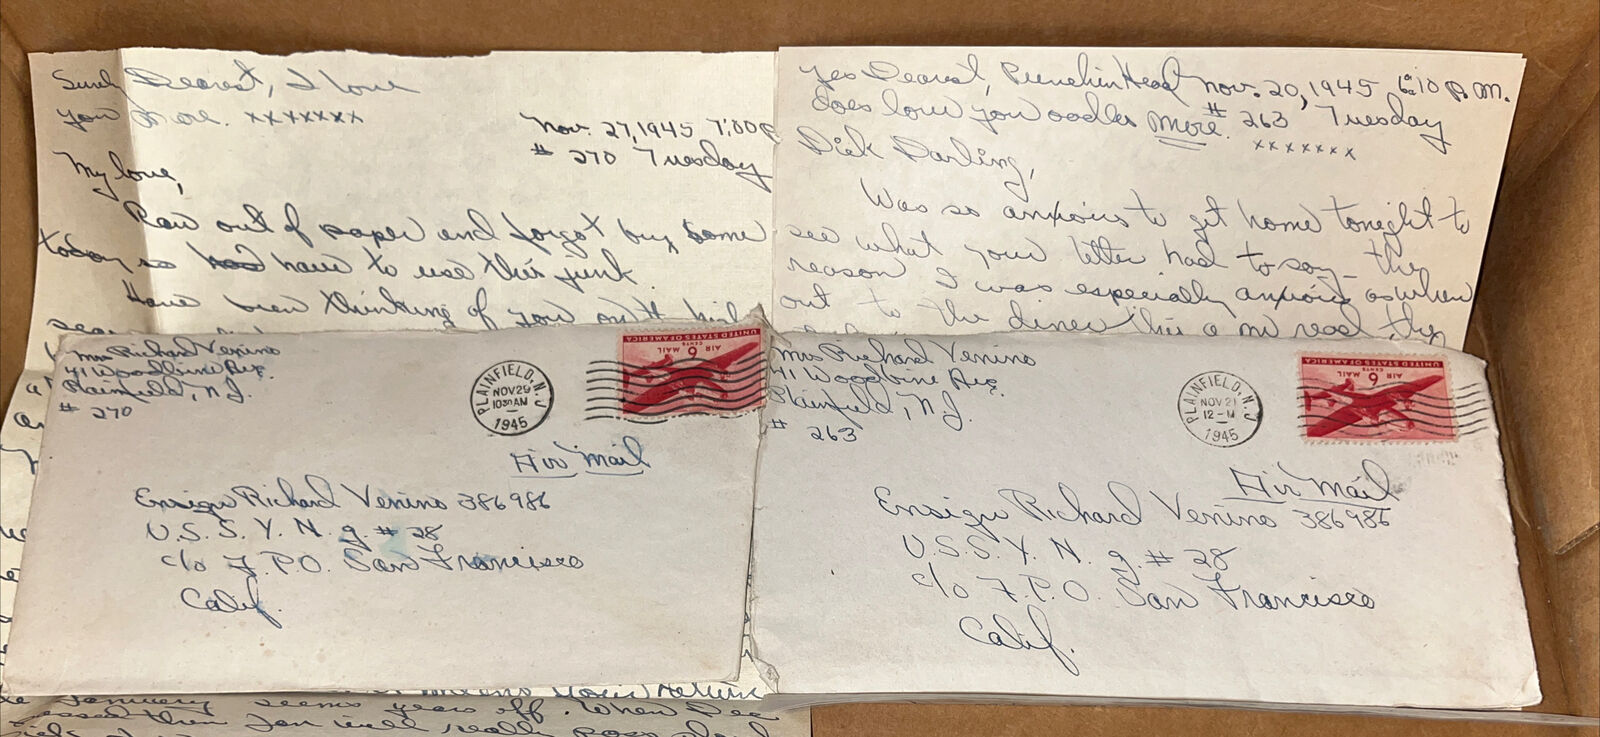 2 1945 Love Letters from Wife, Post WWII, US Navy Ensign Pearl Harbor Horoscope